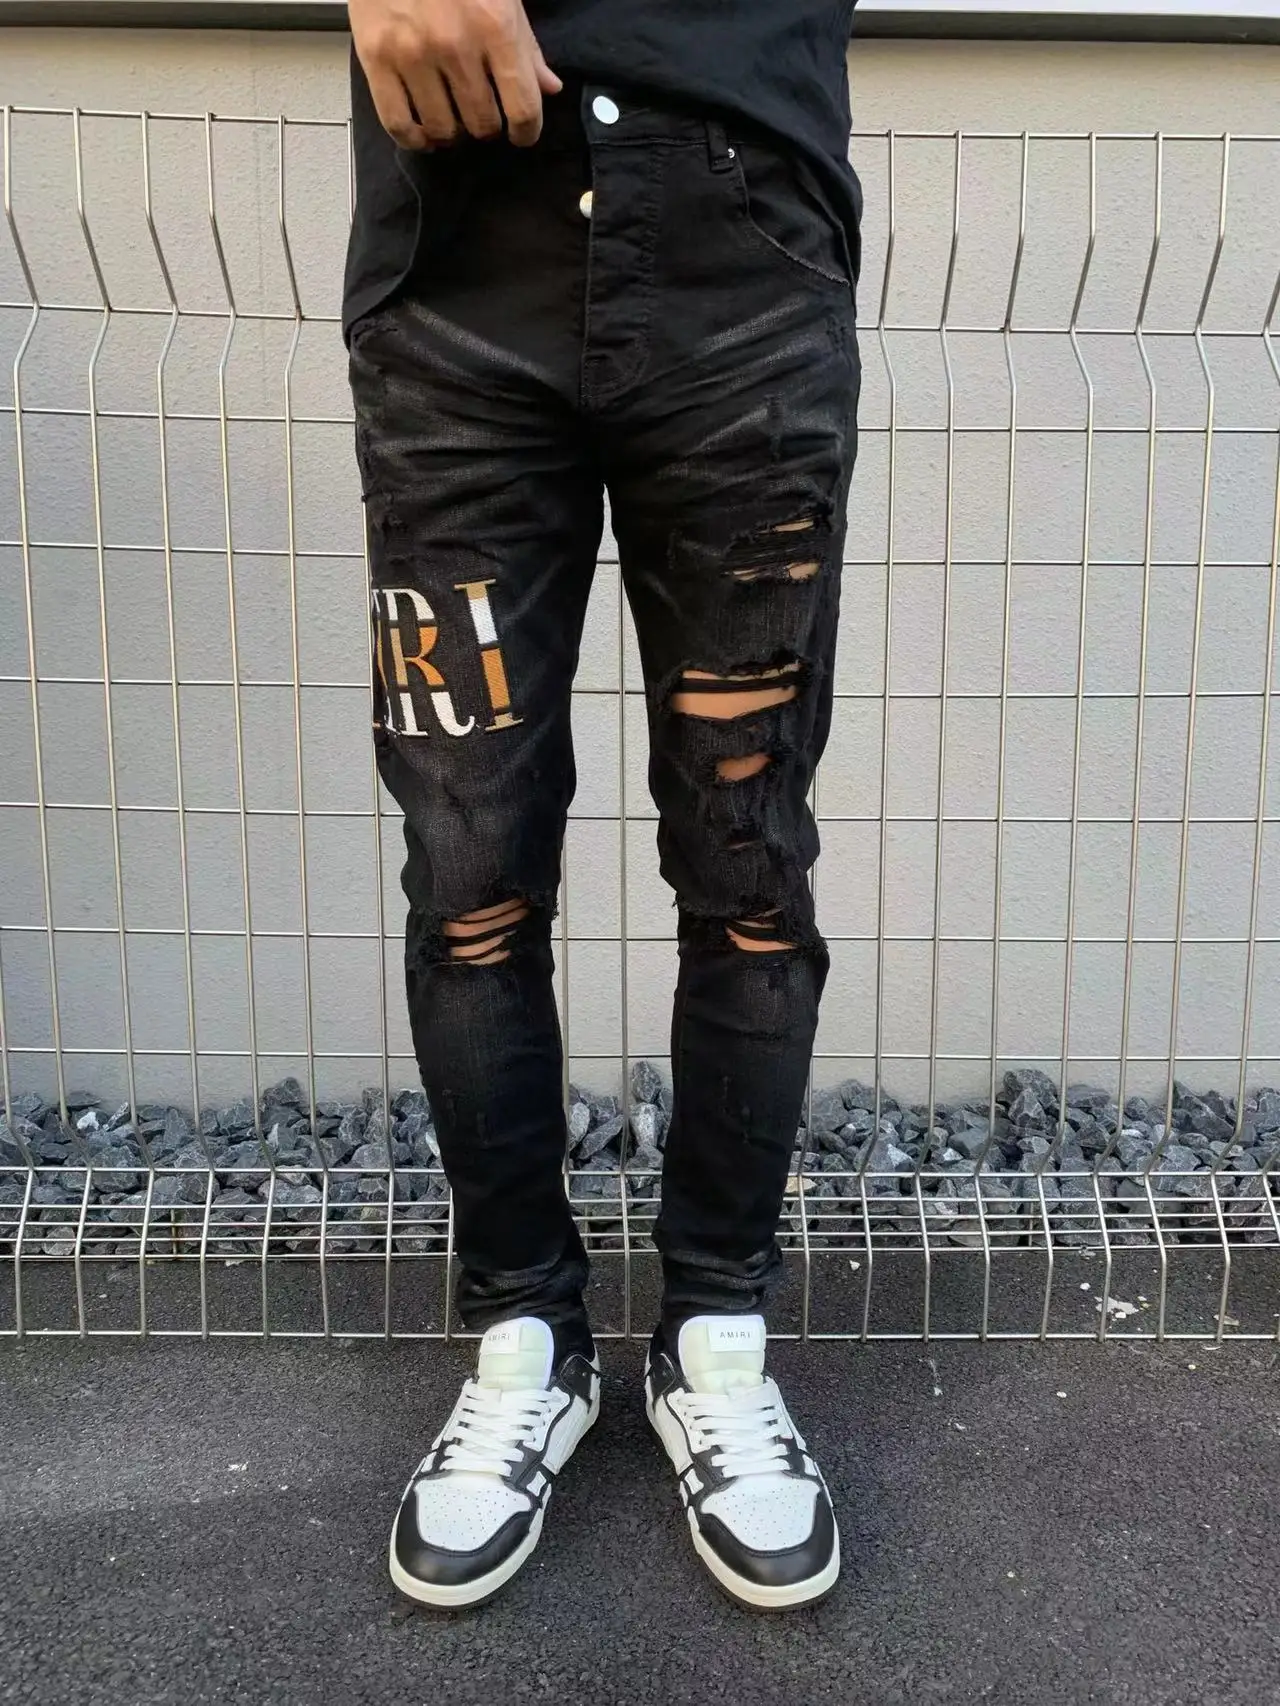 

designer jean brands mens brand Denim Hole Distressed Skinny Ripped Damaged Painted Slim Stretch Destroyed Jeans Pants Trousers